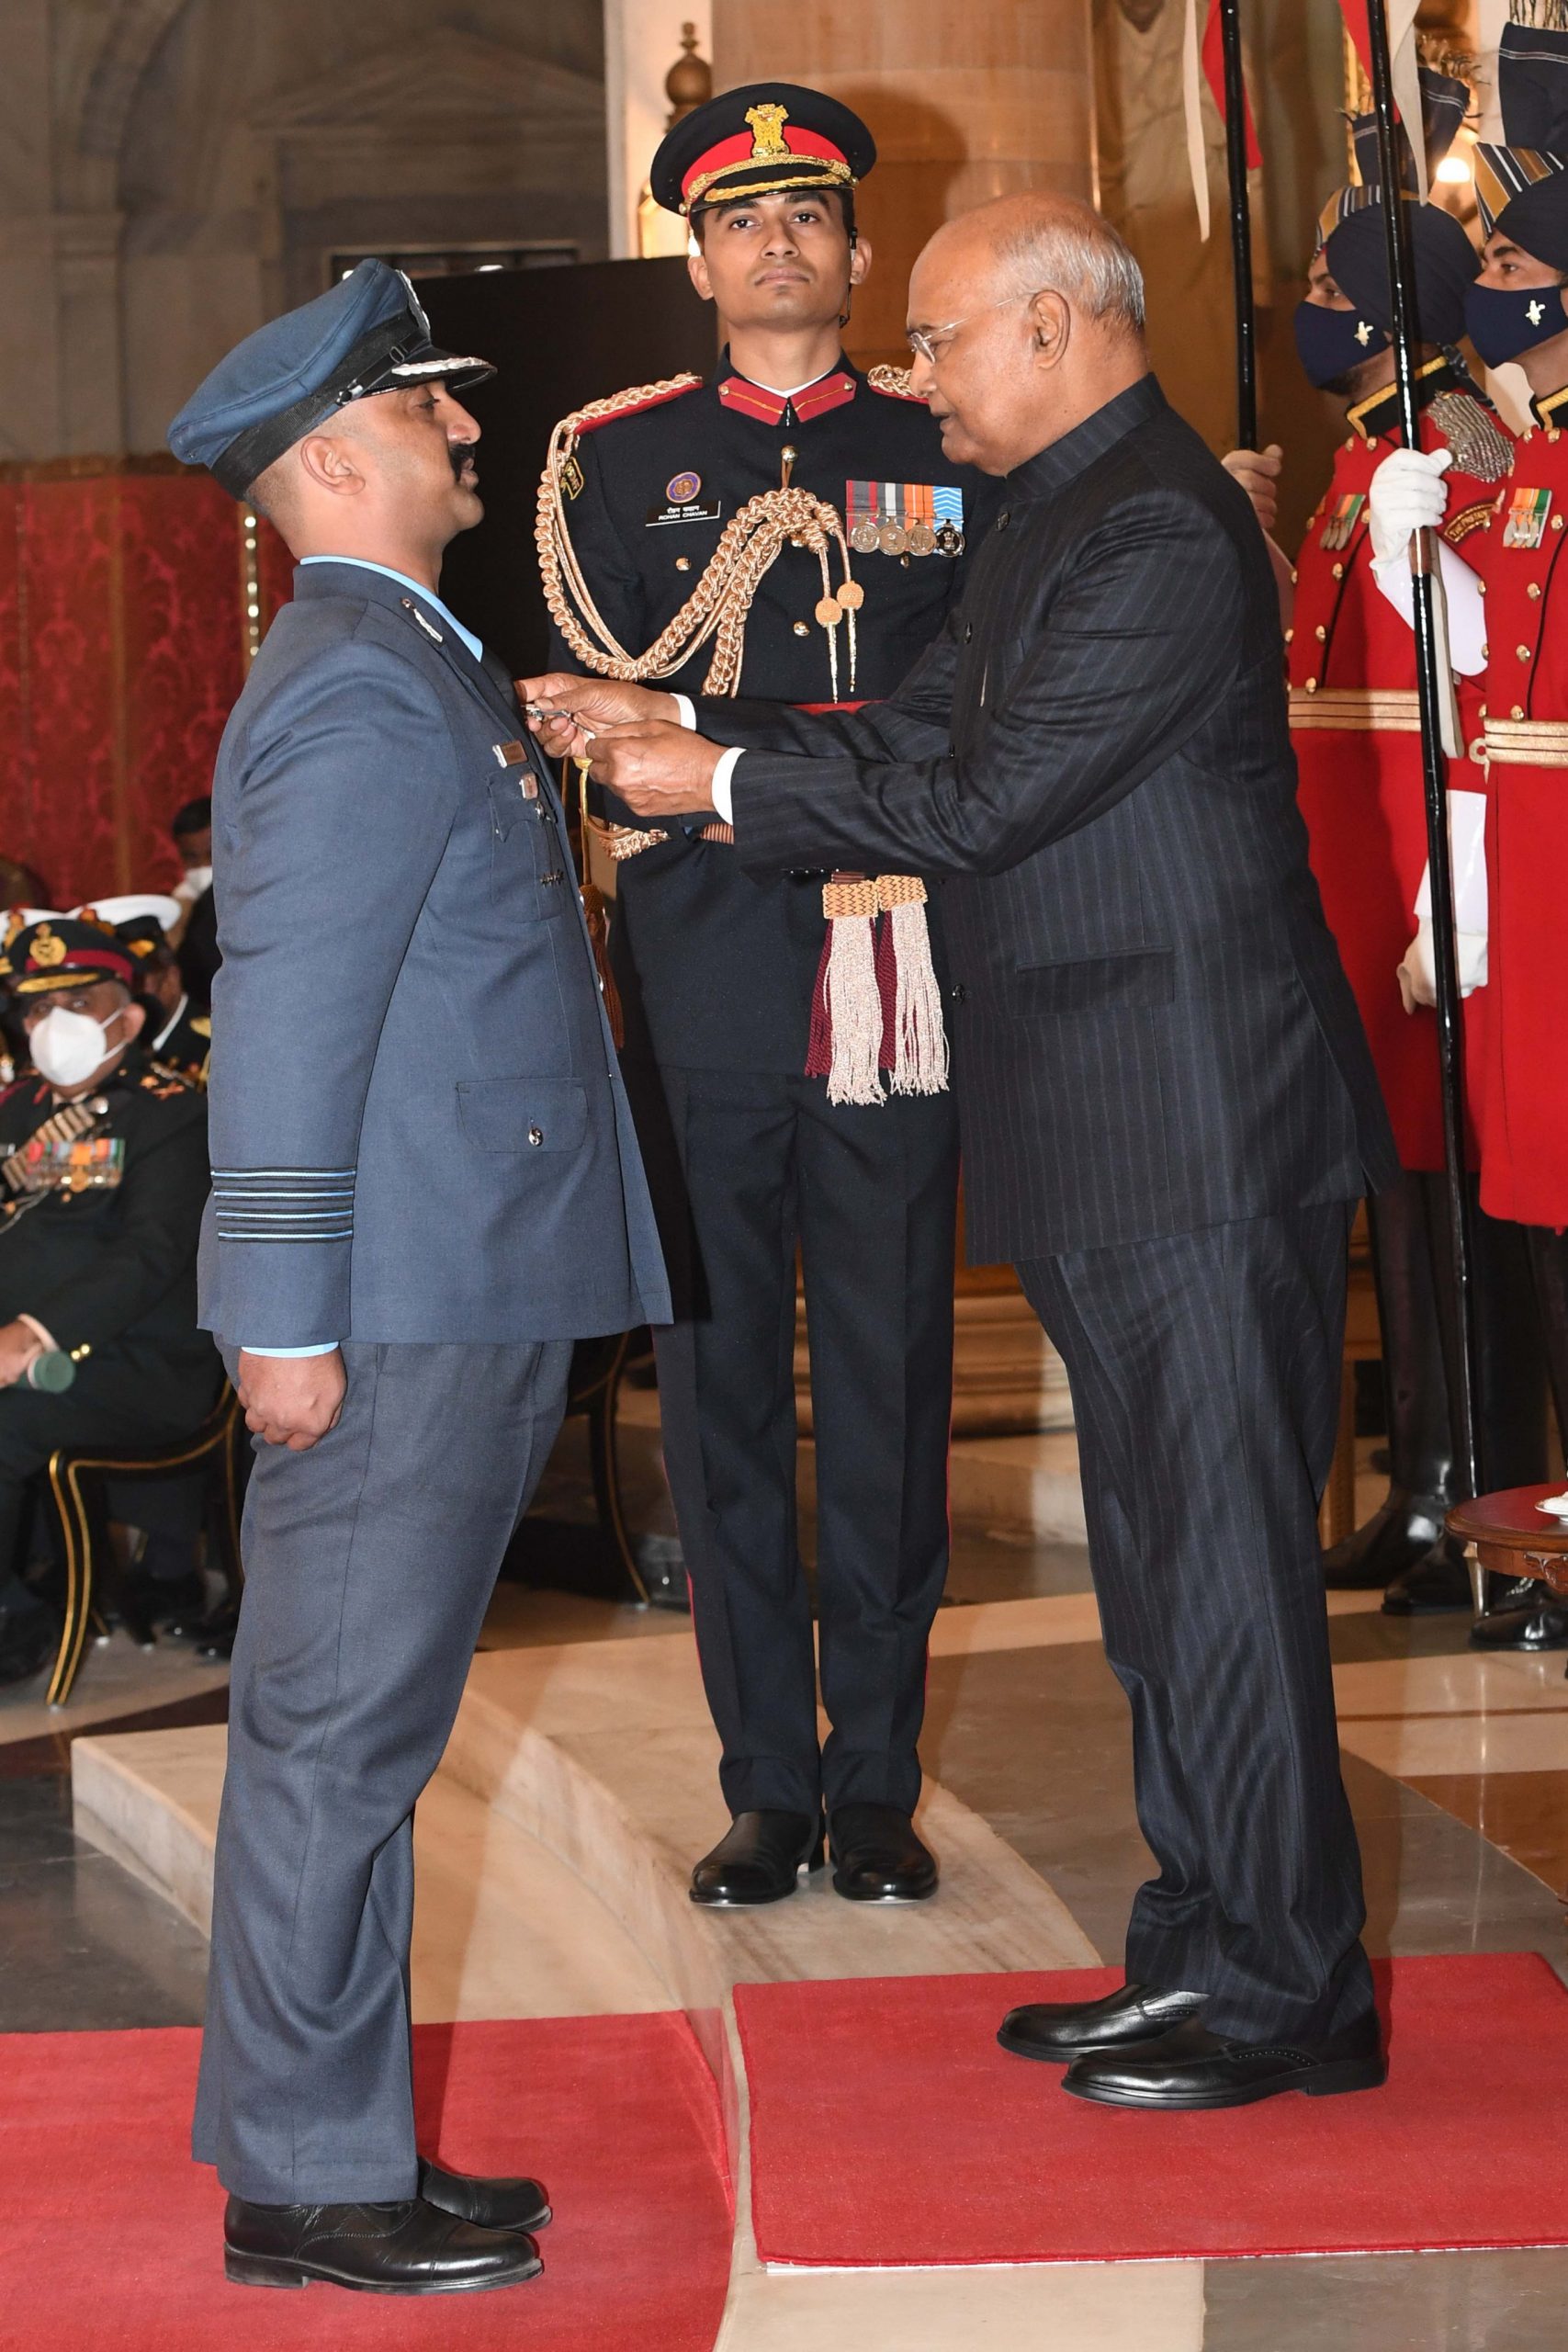 President Kovind presents Vir Chakra to Wing Commander (now Group Captain) Varthaman Abhinandan. He showed conspicuous courage, demonstrated gallantry in the face of the enemy while disregarding personal safety and displayed exceptional sense of duty.